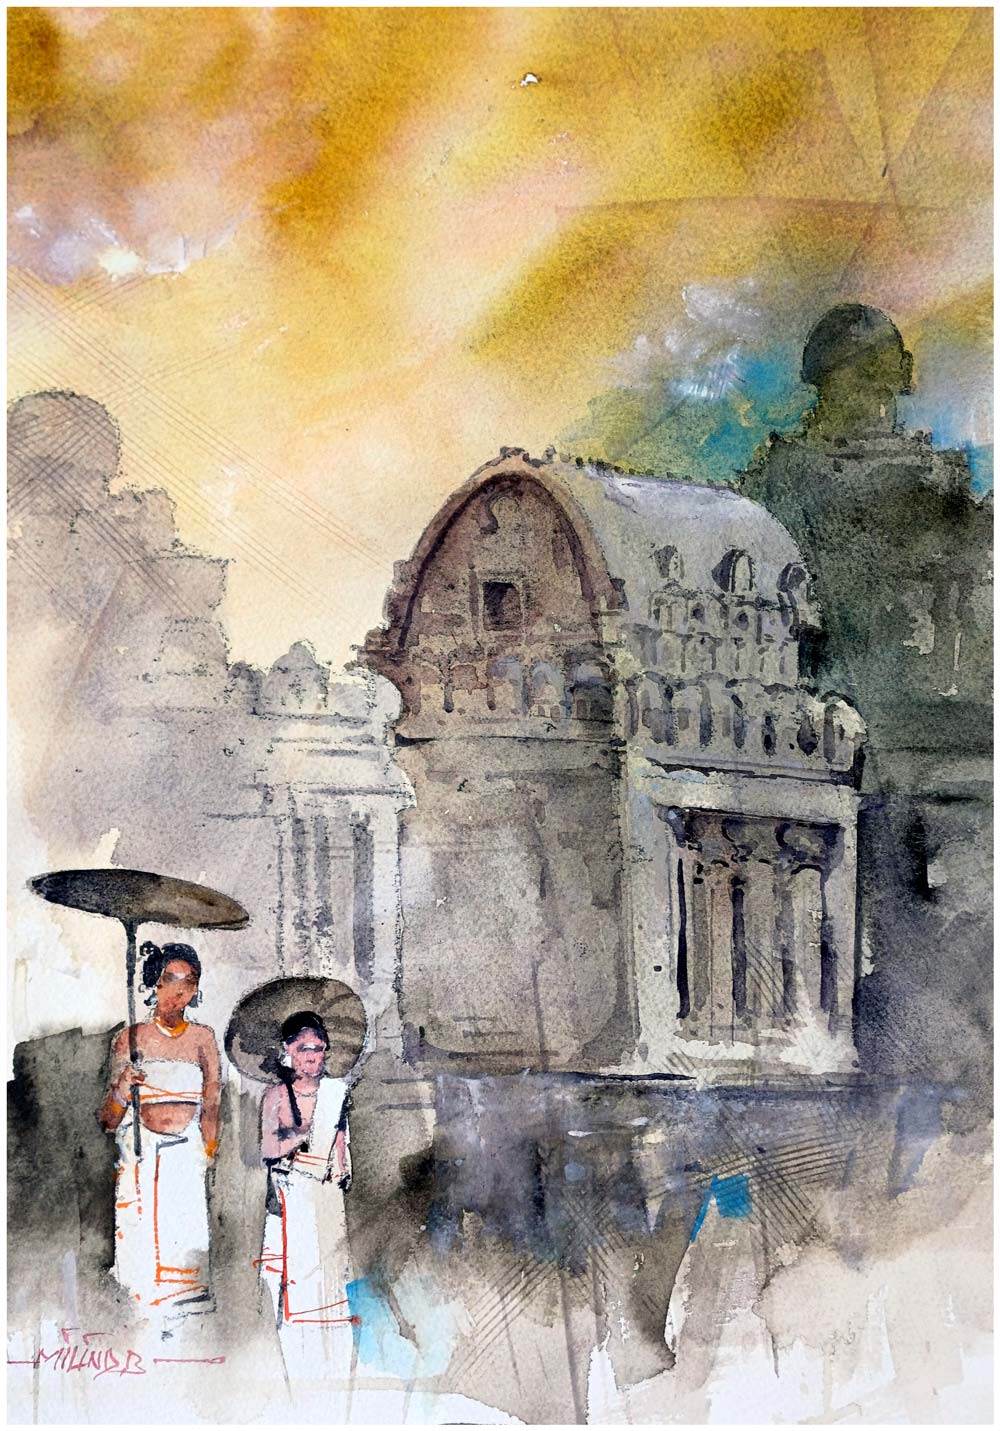 Figurative Painting with Watercolor on Paper "Mahabalipuram" art by Milind Bhanji